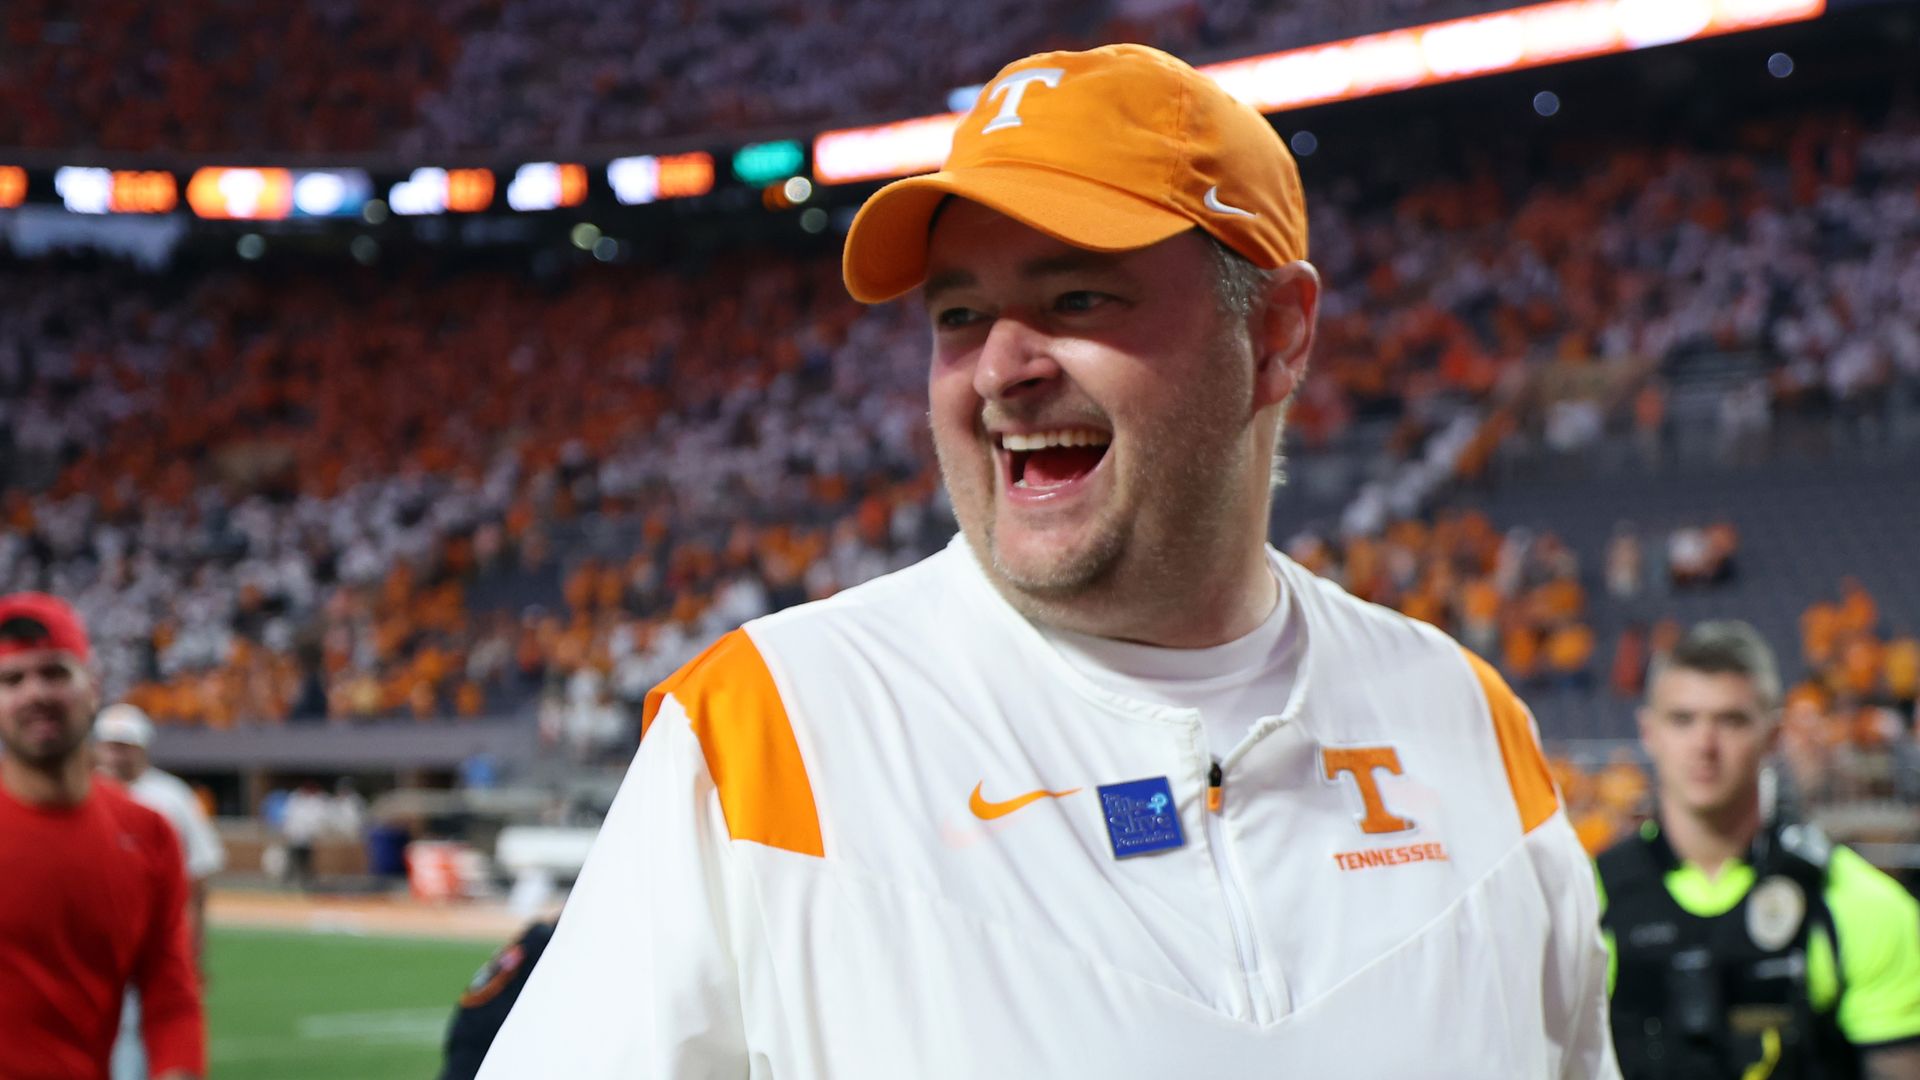 Tennessee football's big year paid off for Coach Heupel - Axios Nashville